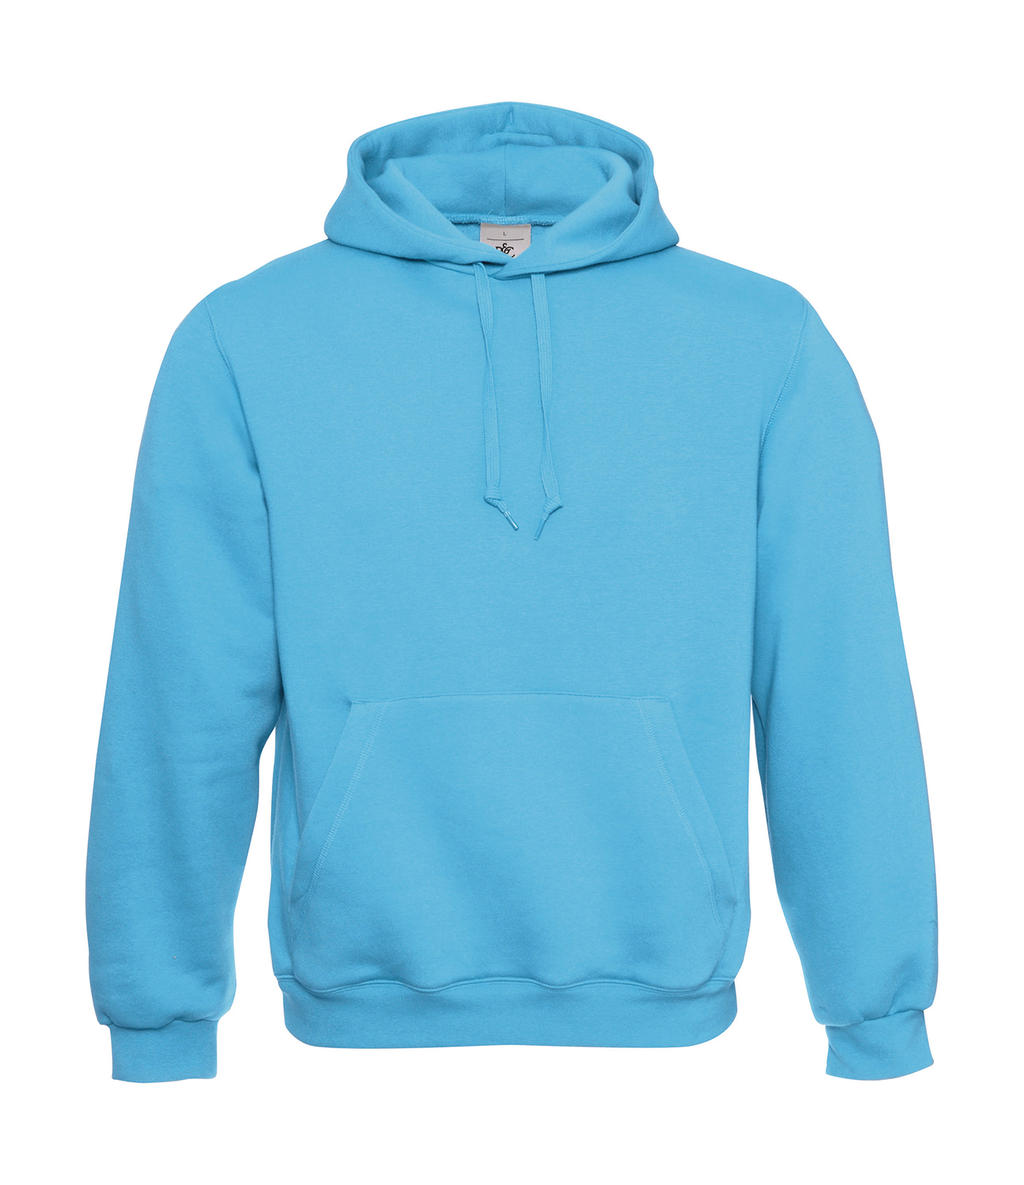  Hooded Sweatshirt in Farbe Very Turquoise